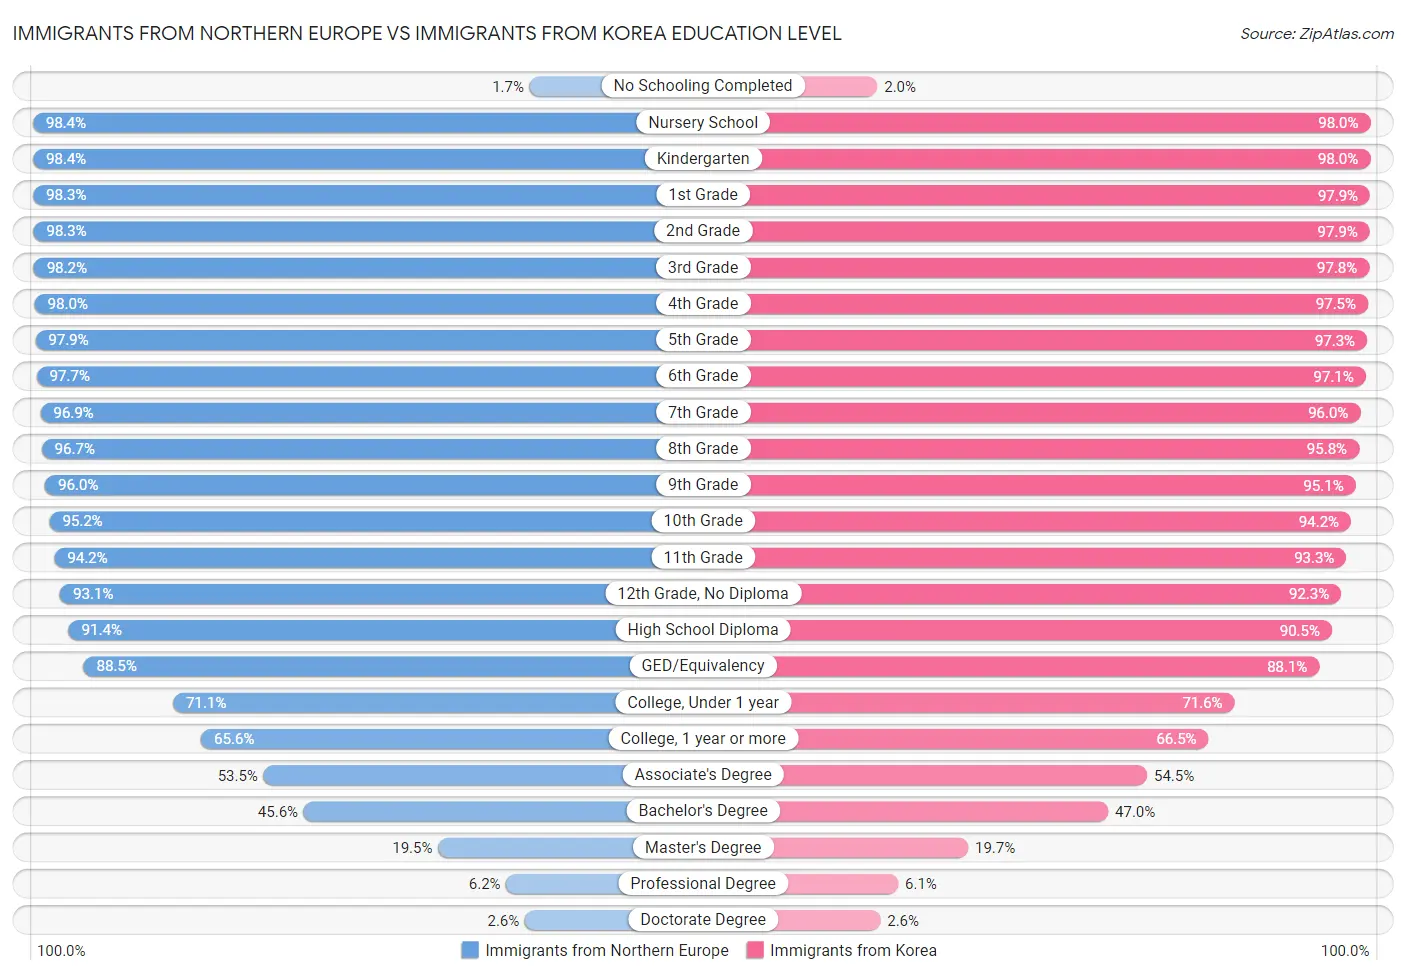 Immigrants from Northern Europe vs Immigrants from Korea Education Level